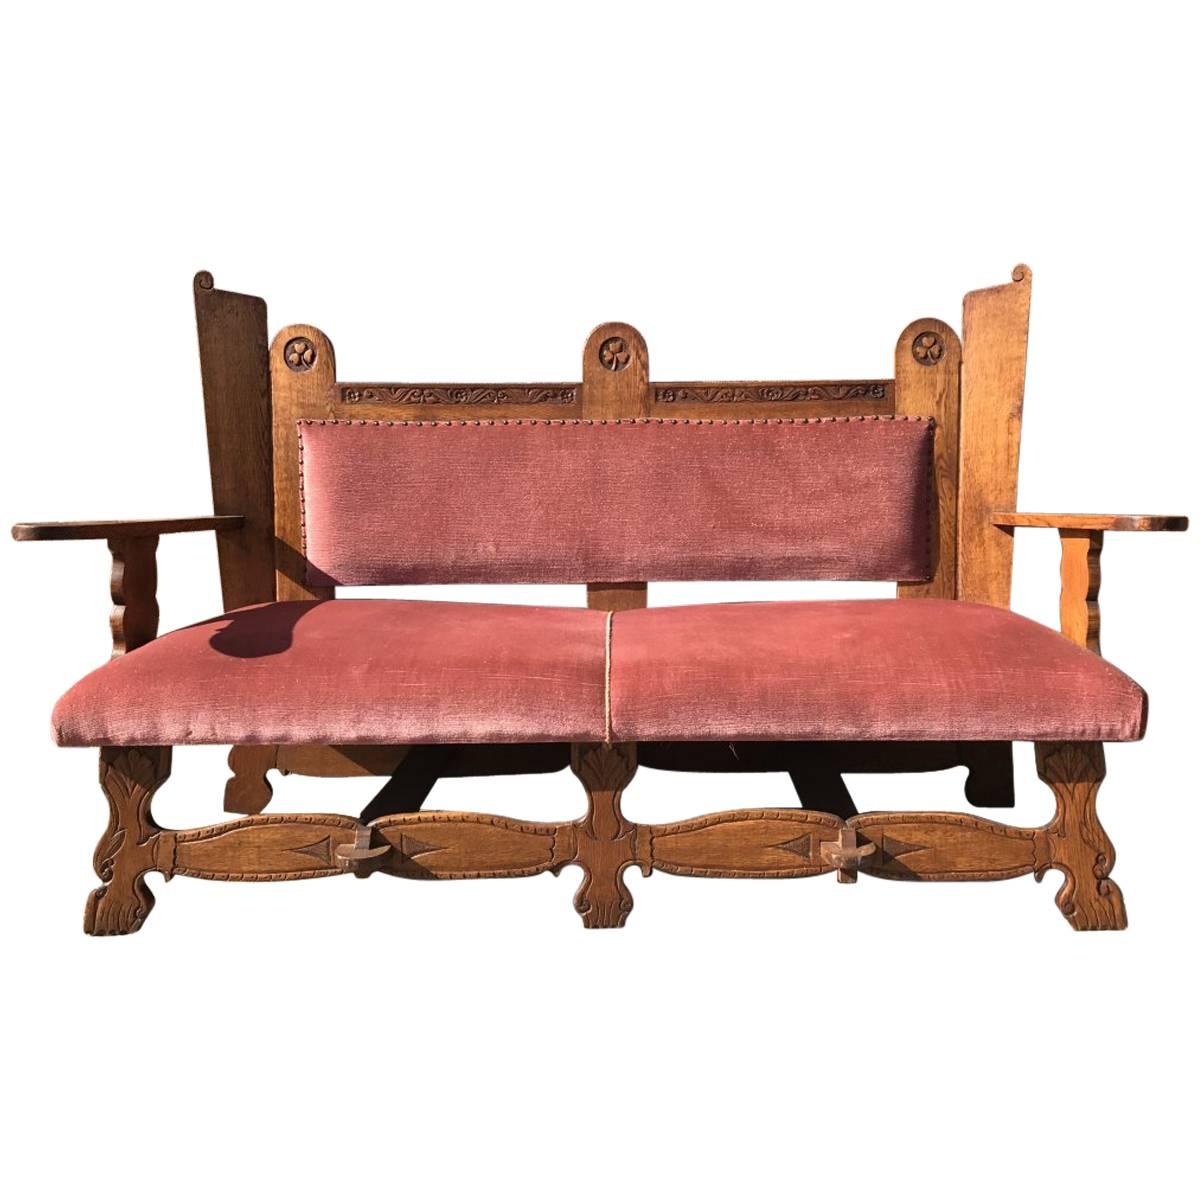 Arts & Crafts Style Settee with Clover Leaf Carvings and Pegged Construction